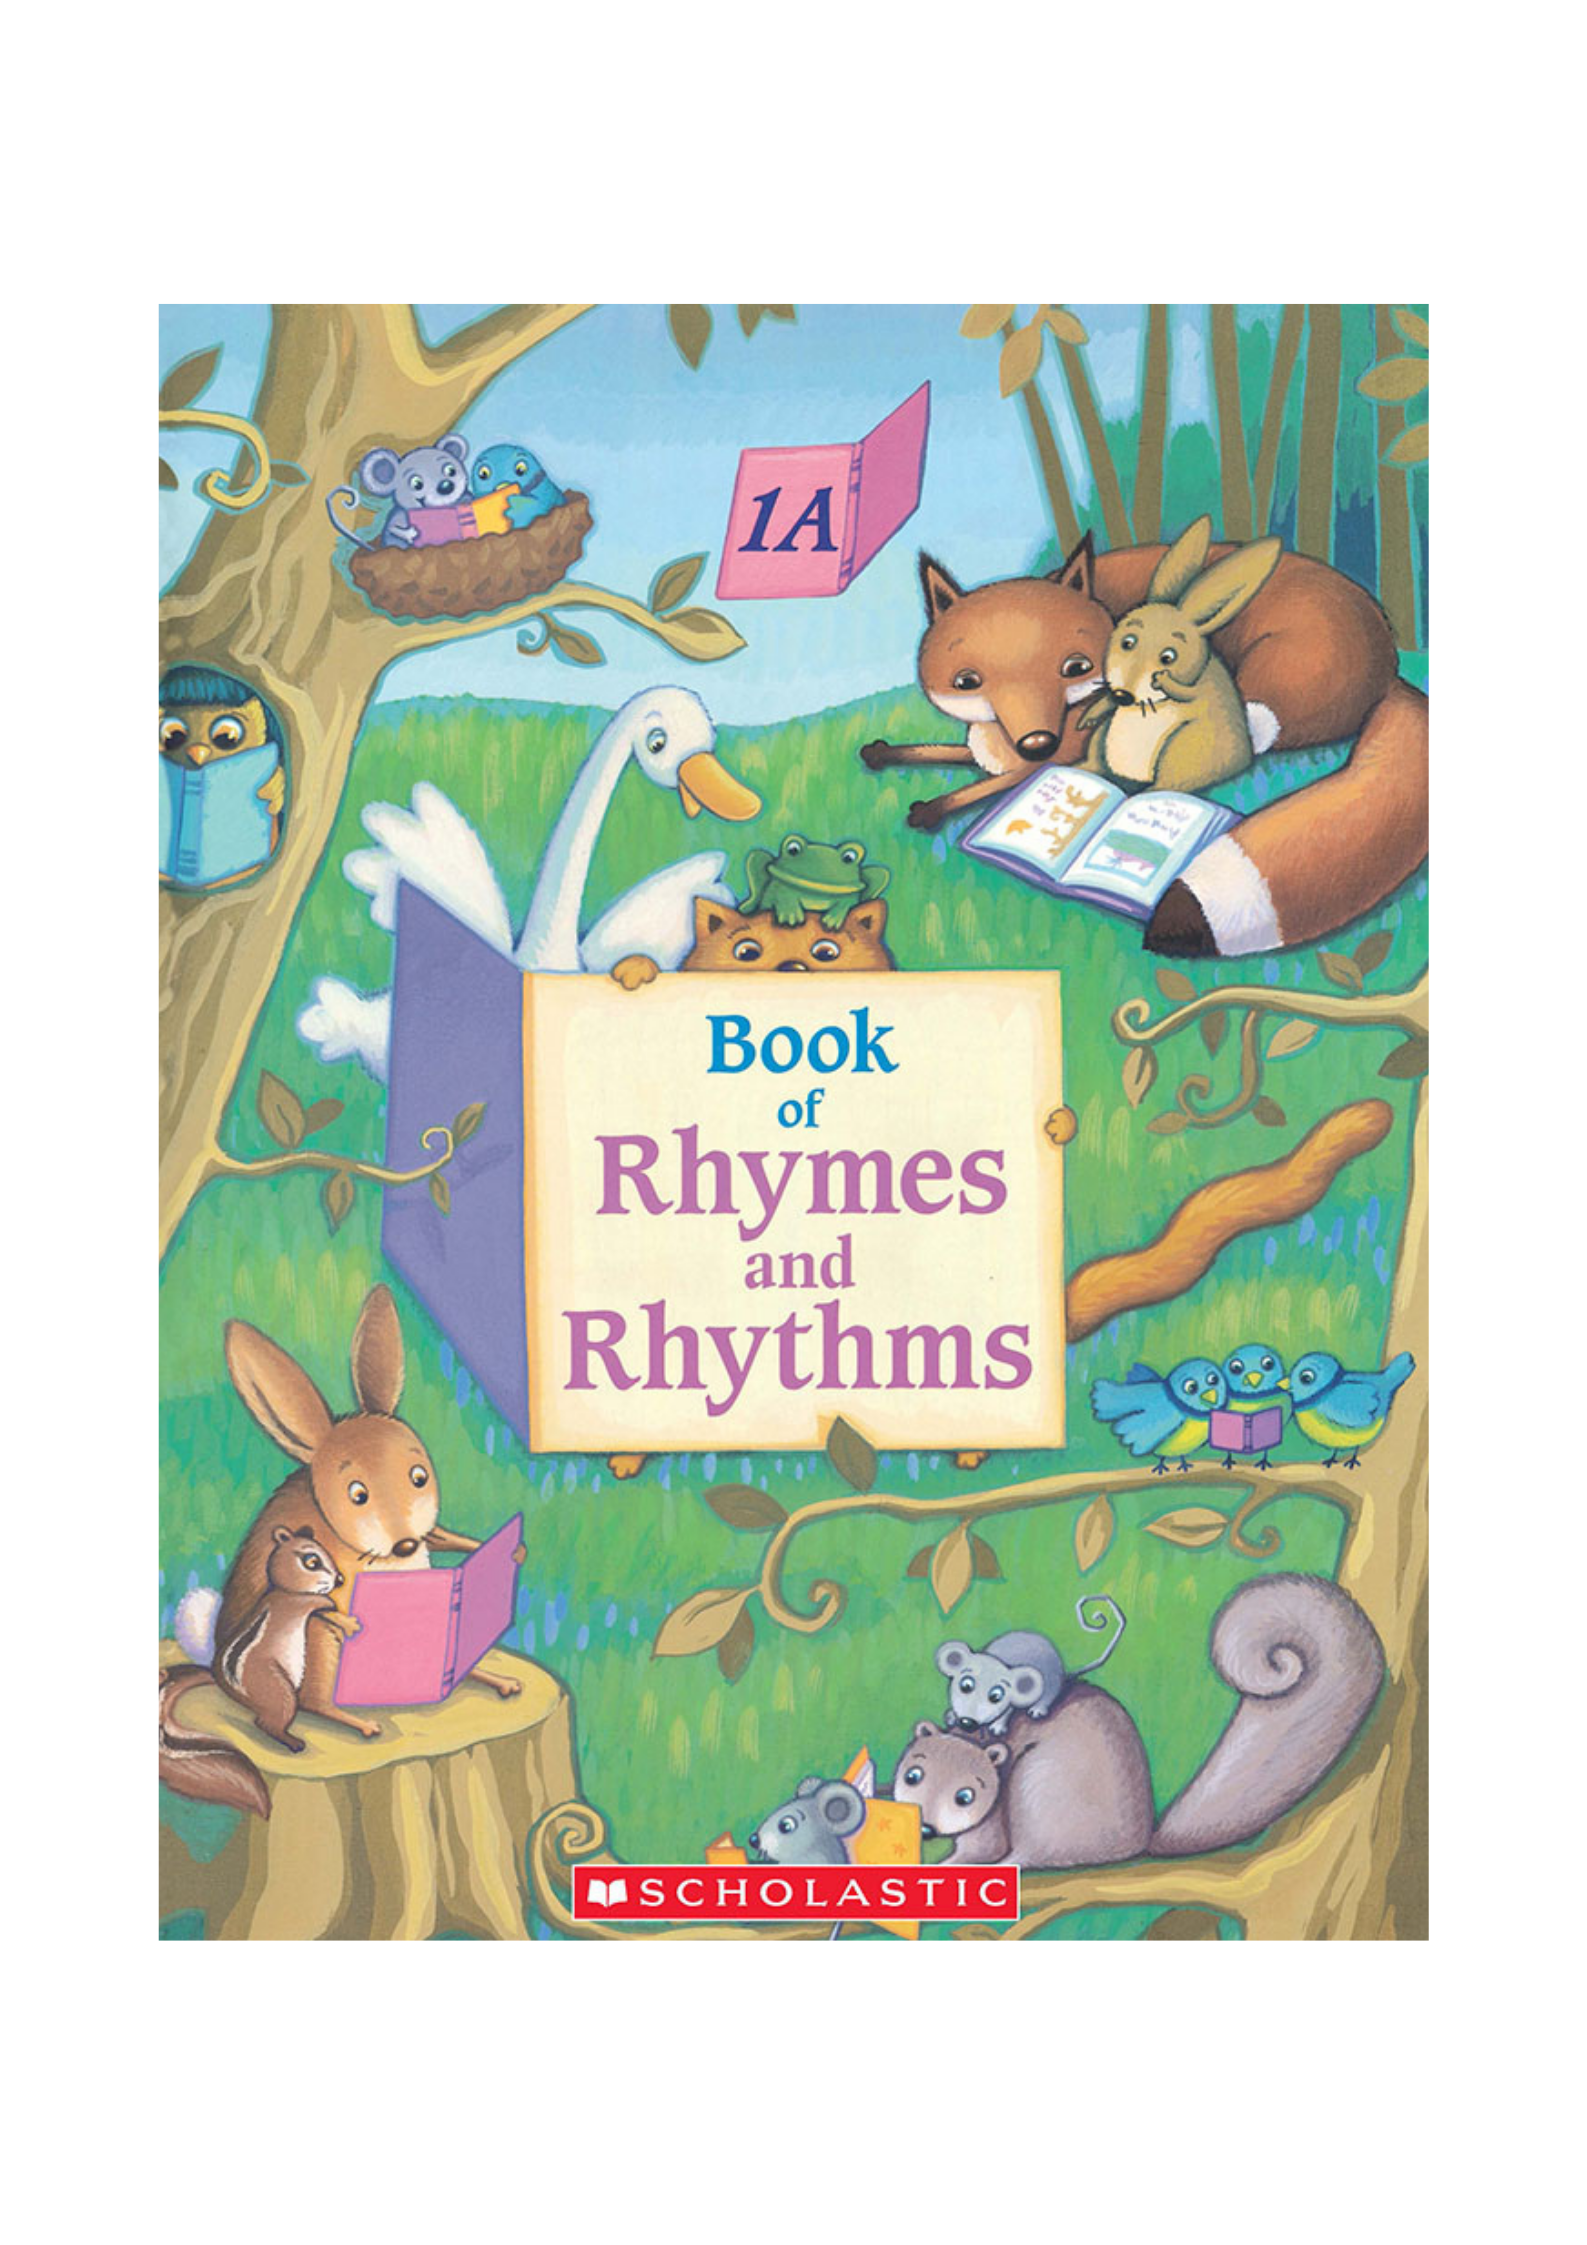 Rhymes and Rhythms Collection: Book Of Rhymes And Rhythms (1A)